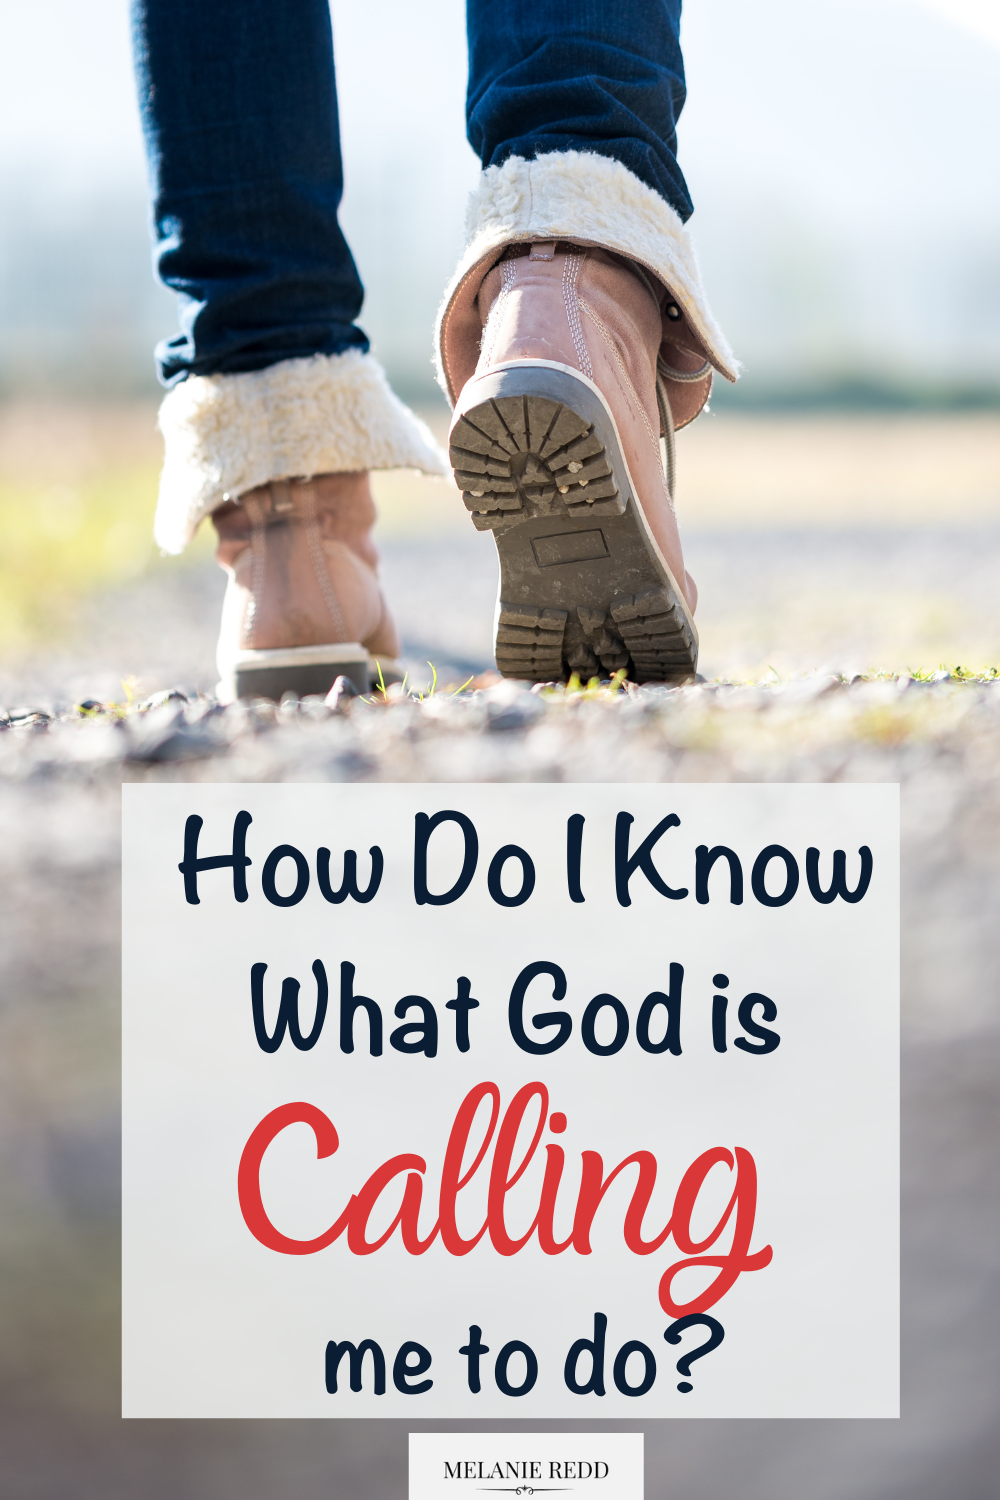 What work has God given you to complete? What does He want you to do? How do we know? How do I know what God is calling me to do? #calling #godcalling #purpose